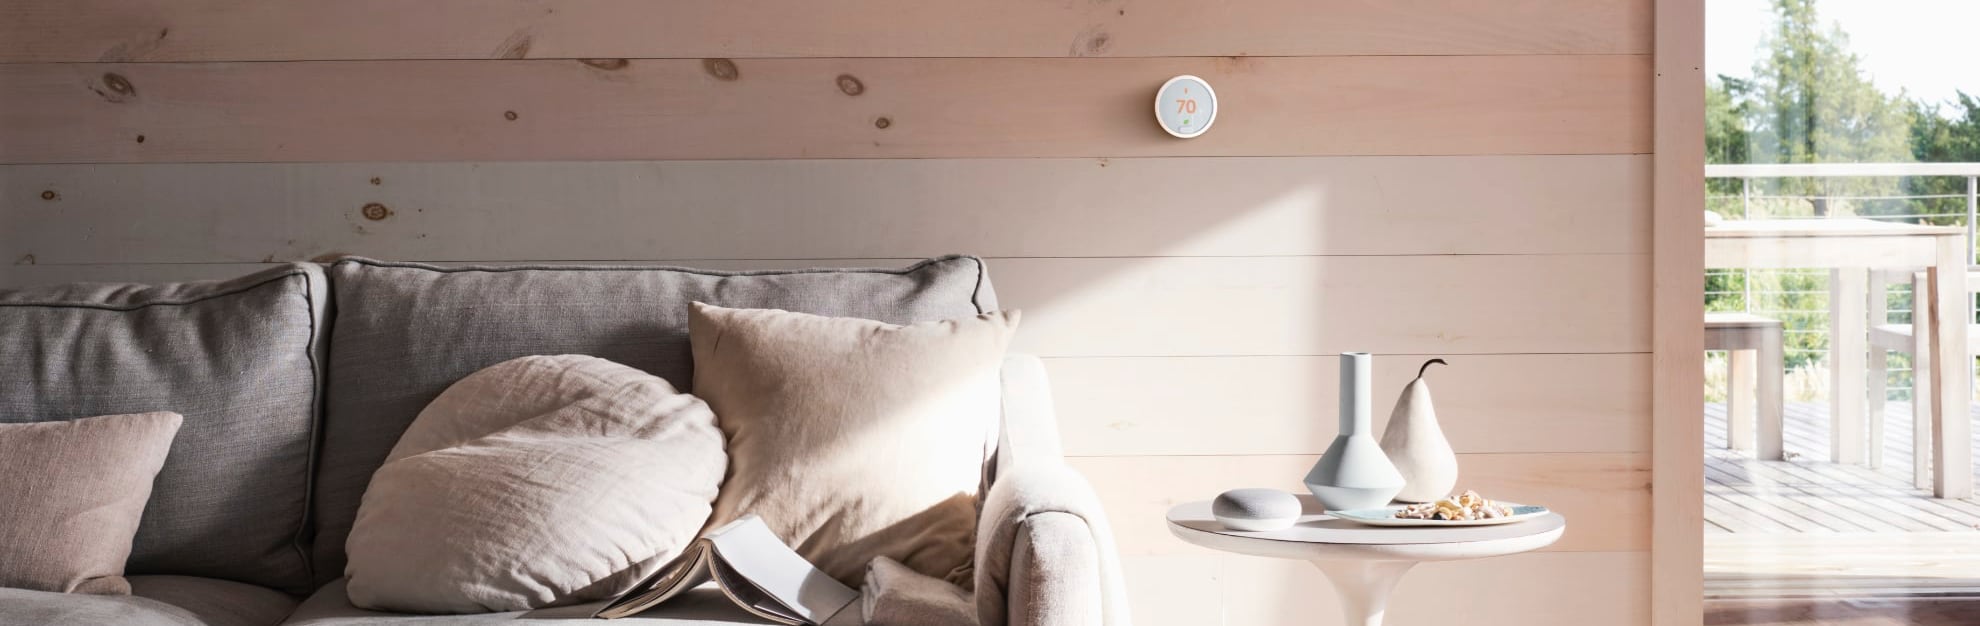 Vivint Home Automation in Buffalo